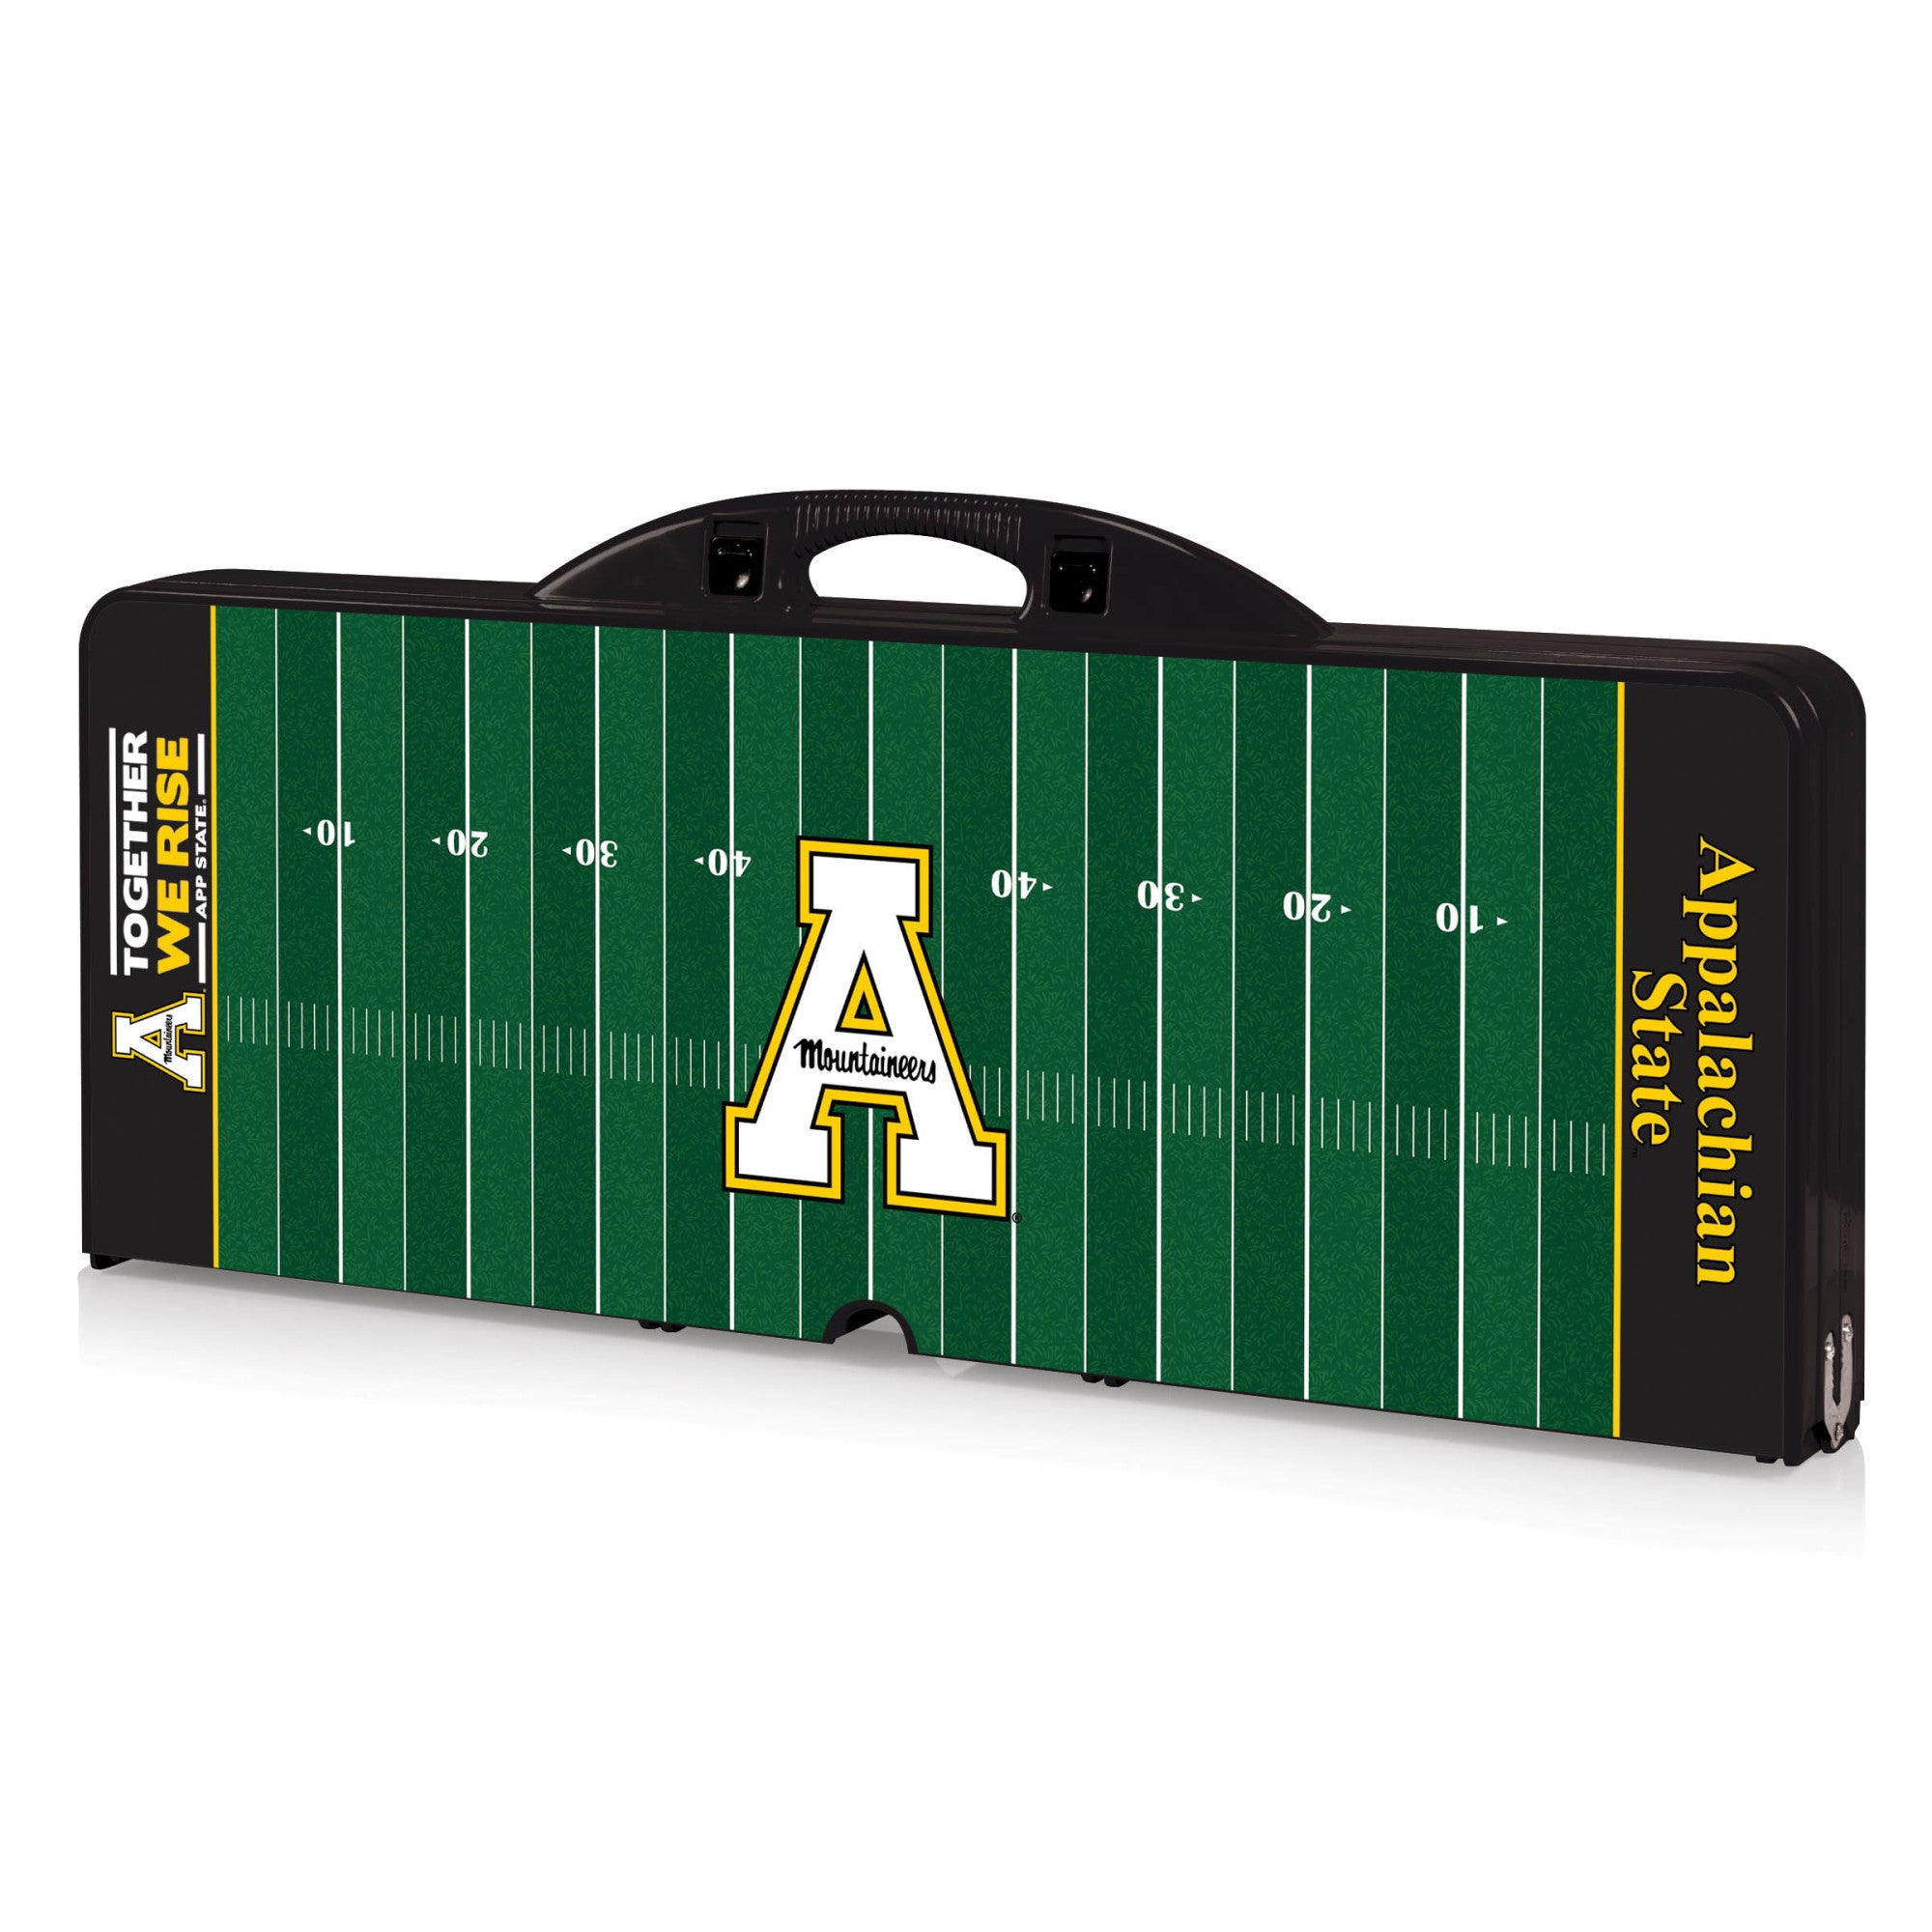 Football Field - App State Mountaineers - Picnic Table Portable Folding Table with Seats